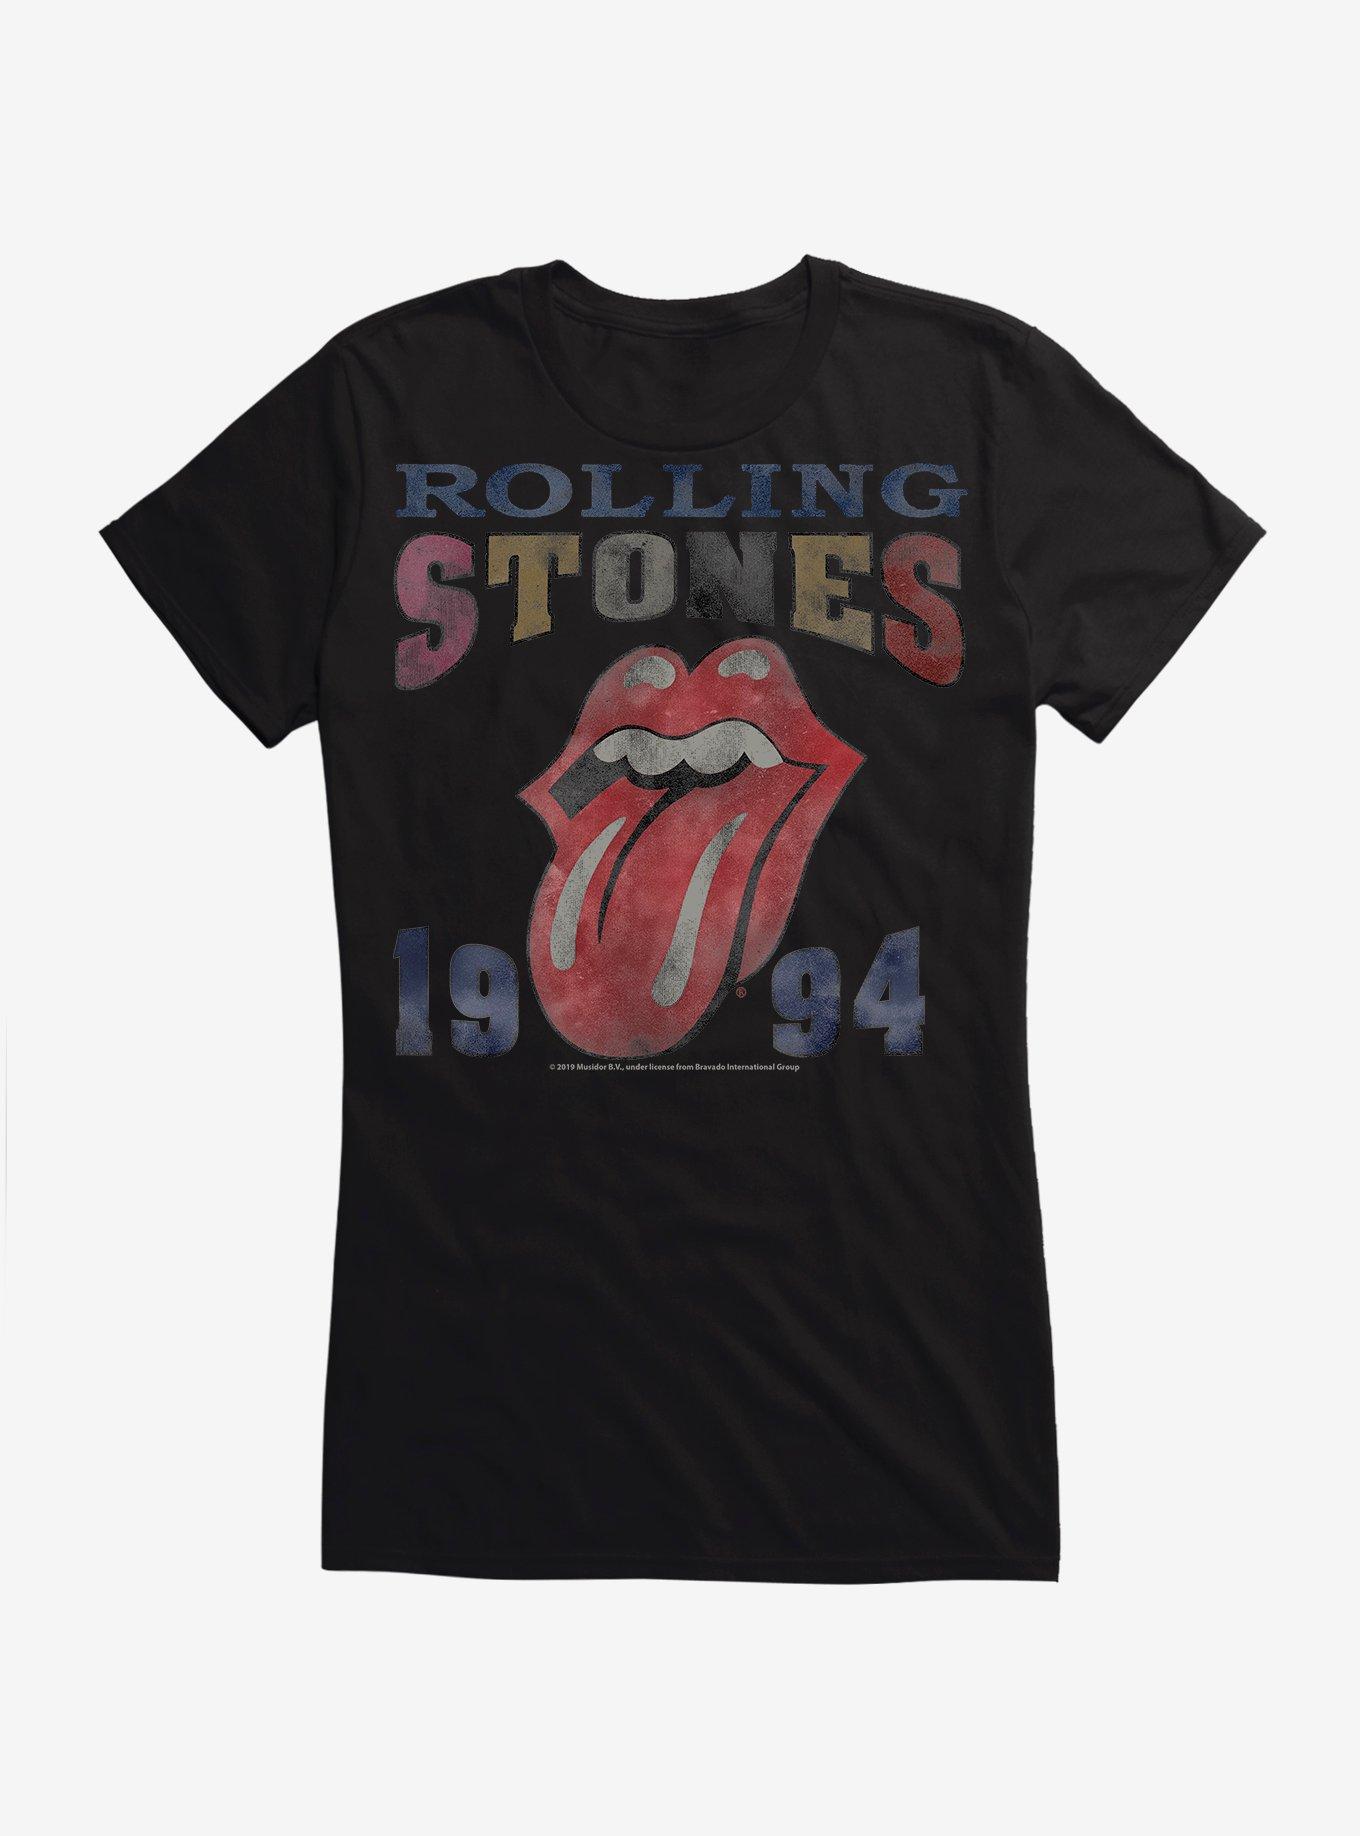 The Rolling Stones 1994 Girls T-Shirt